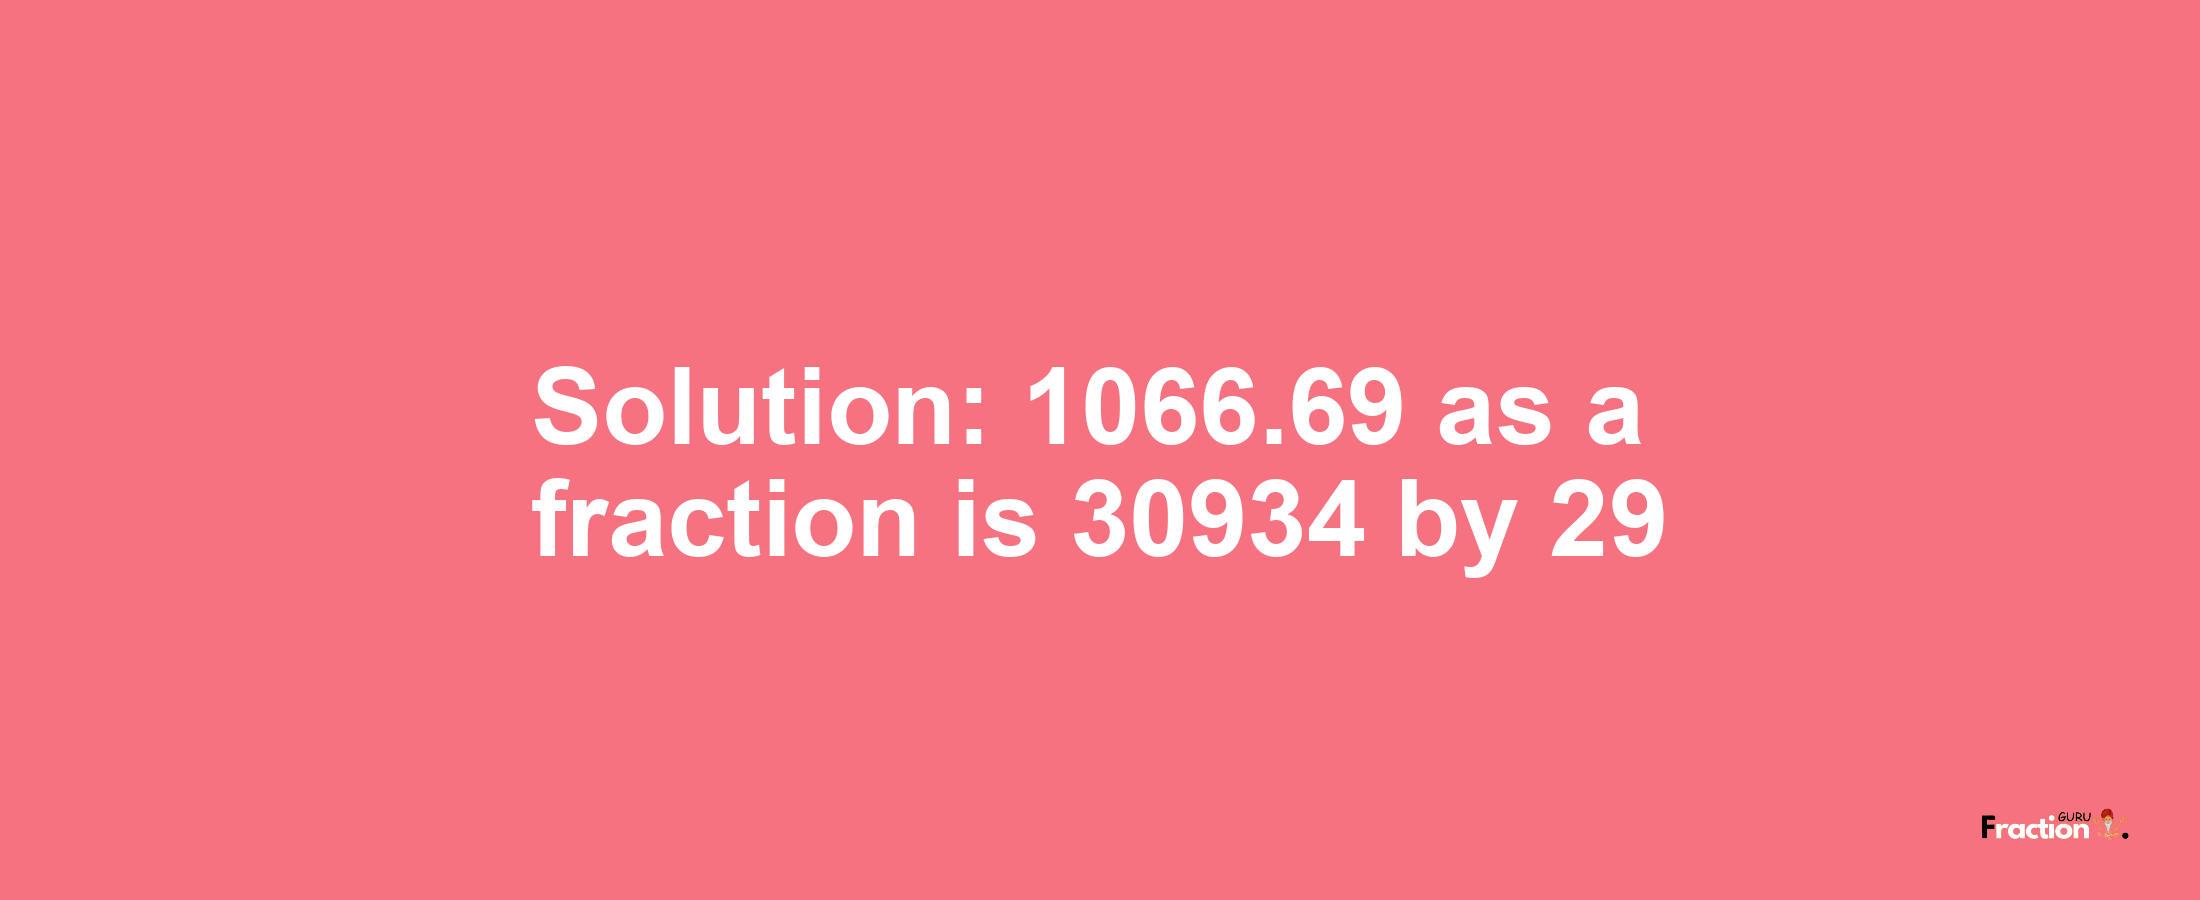 Solution:1066.69 as a fraction is 30934/29